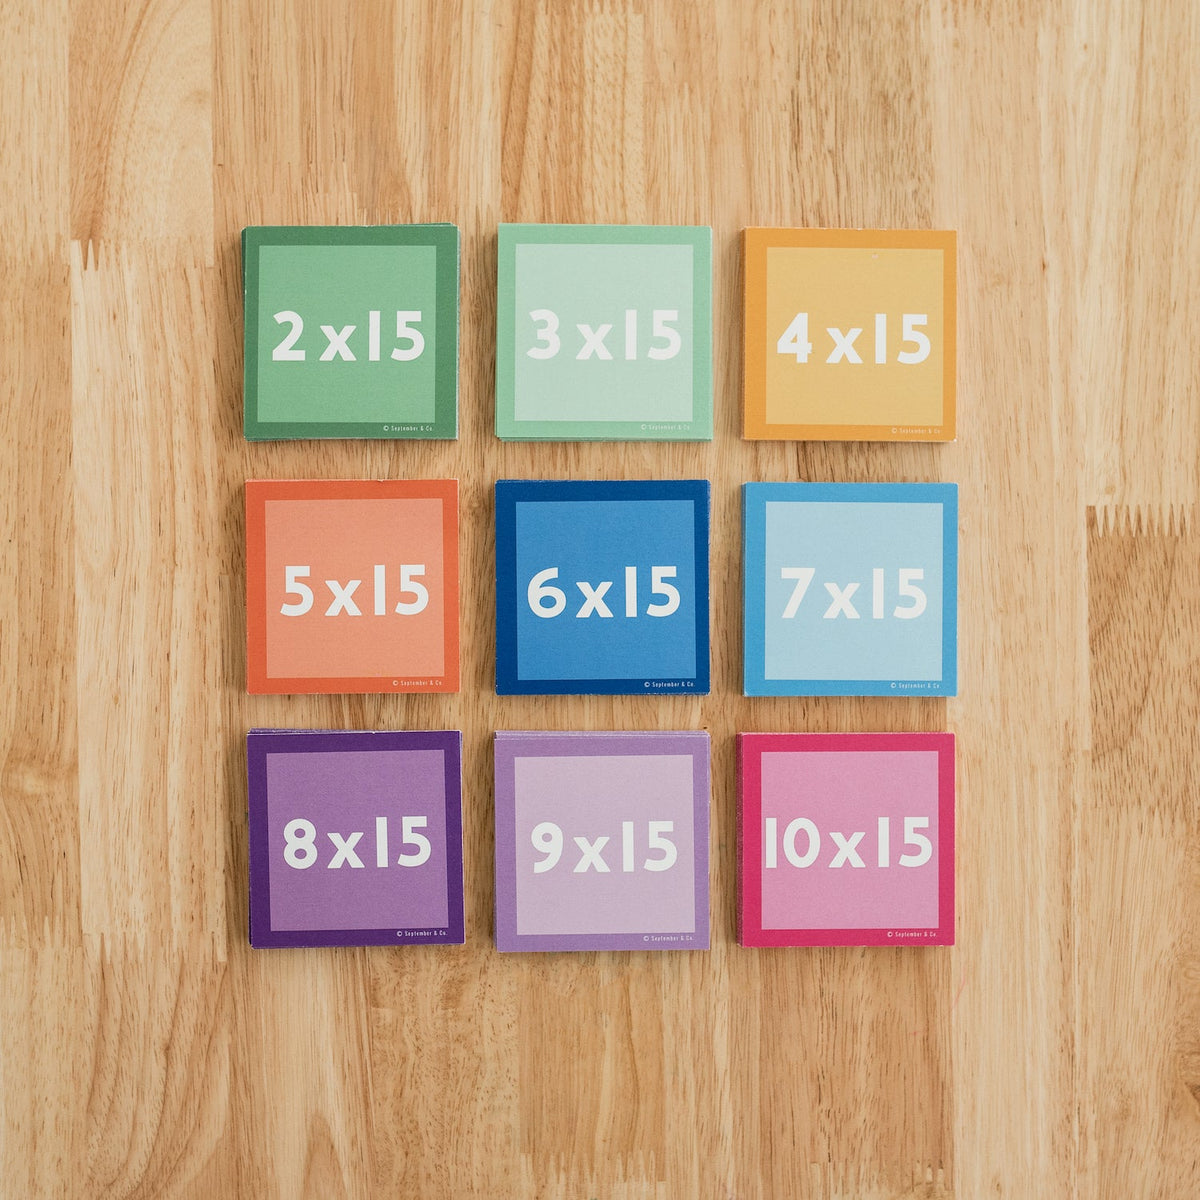 Skip Counting Cards (DOWNLOAD)